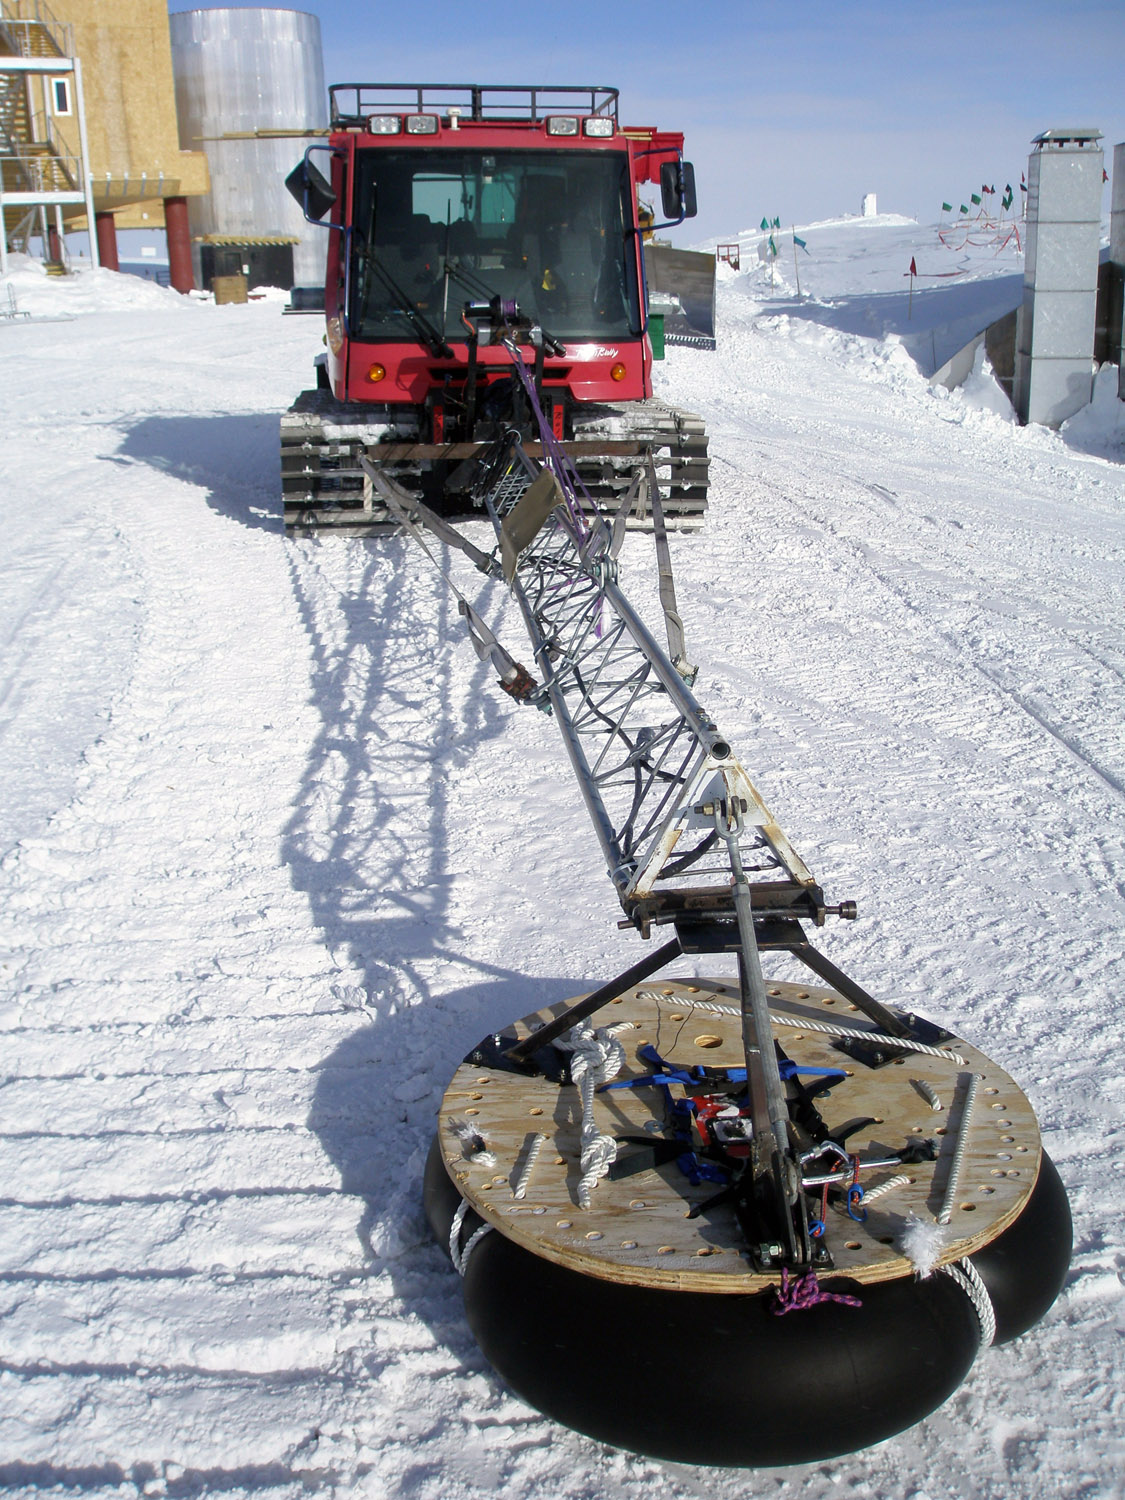 Vehicles and equipment of the South Pole Traverse - 12 - Pisten Bully